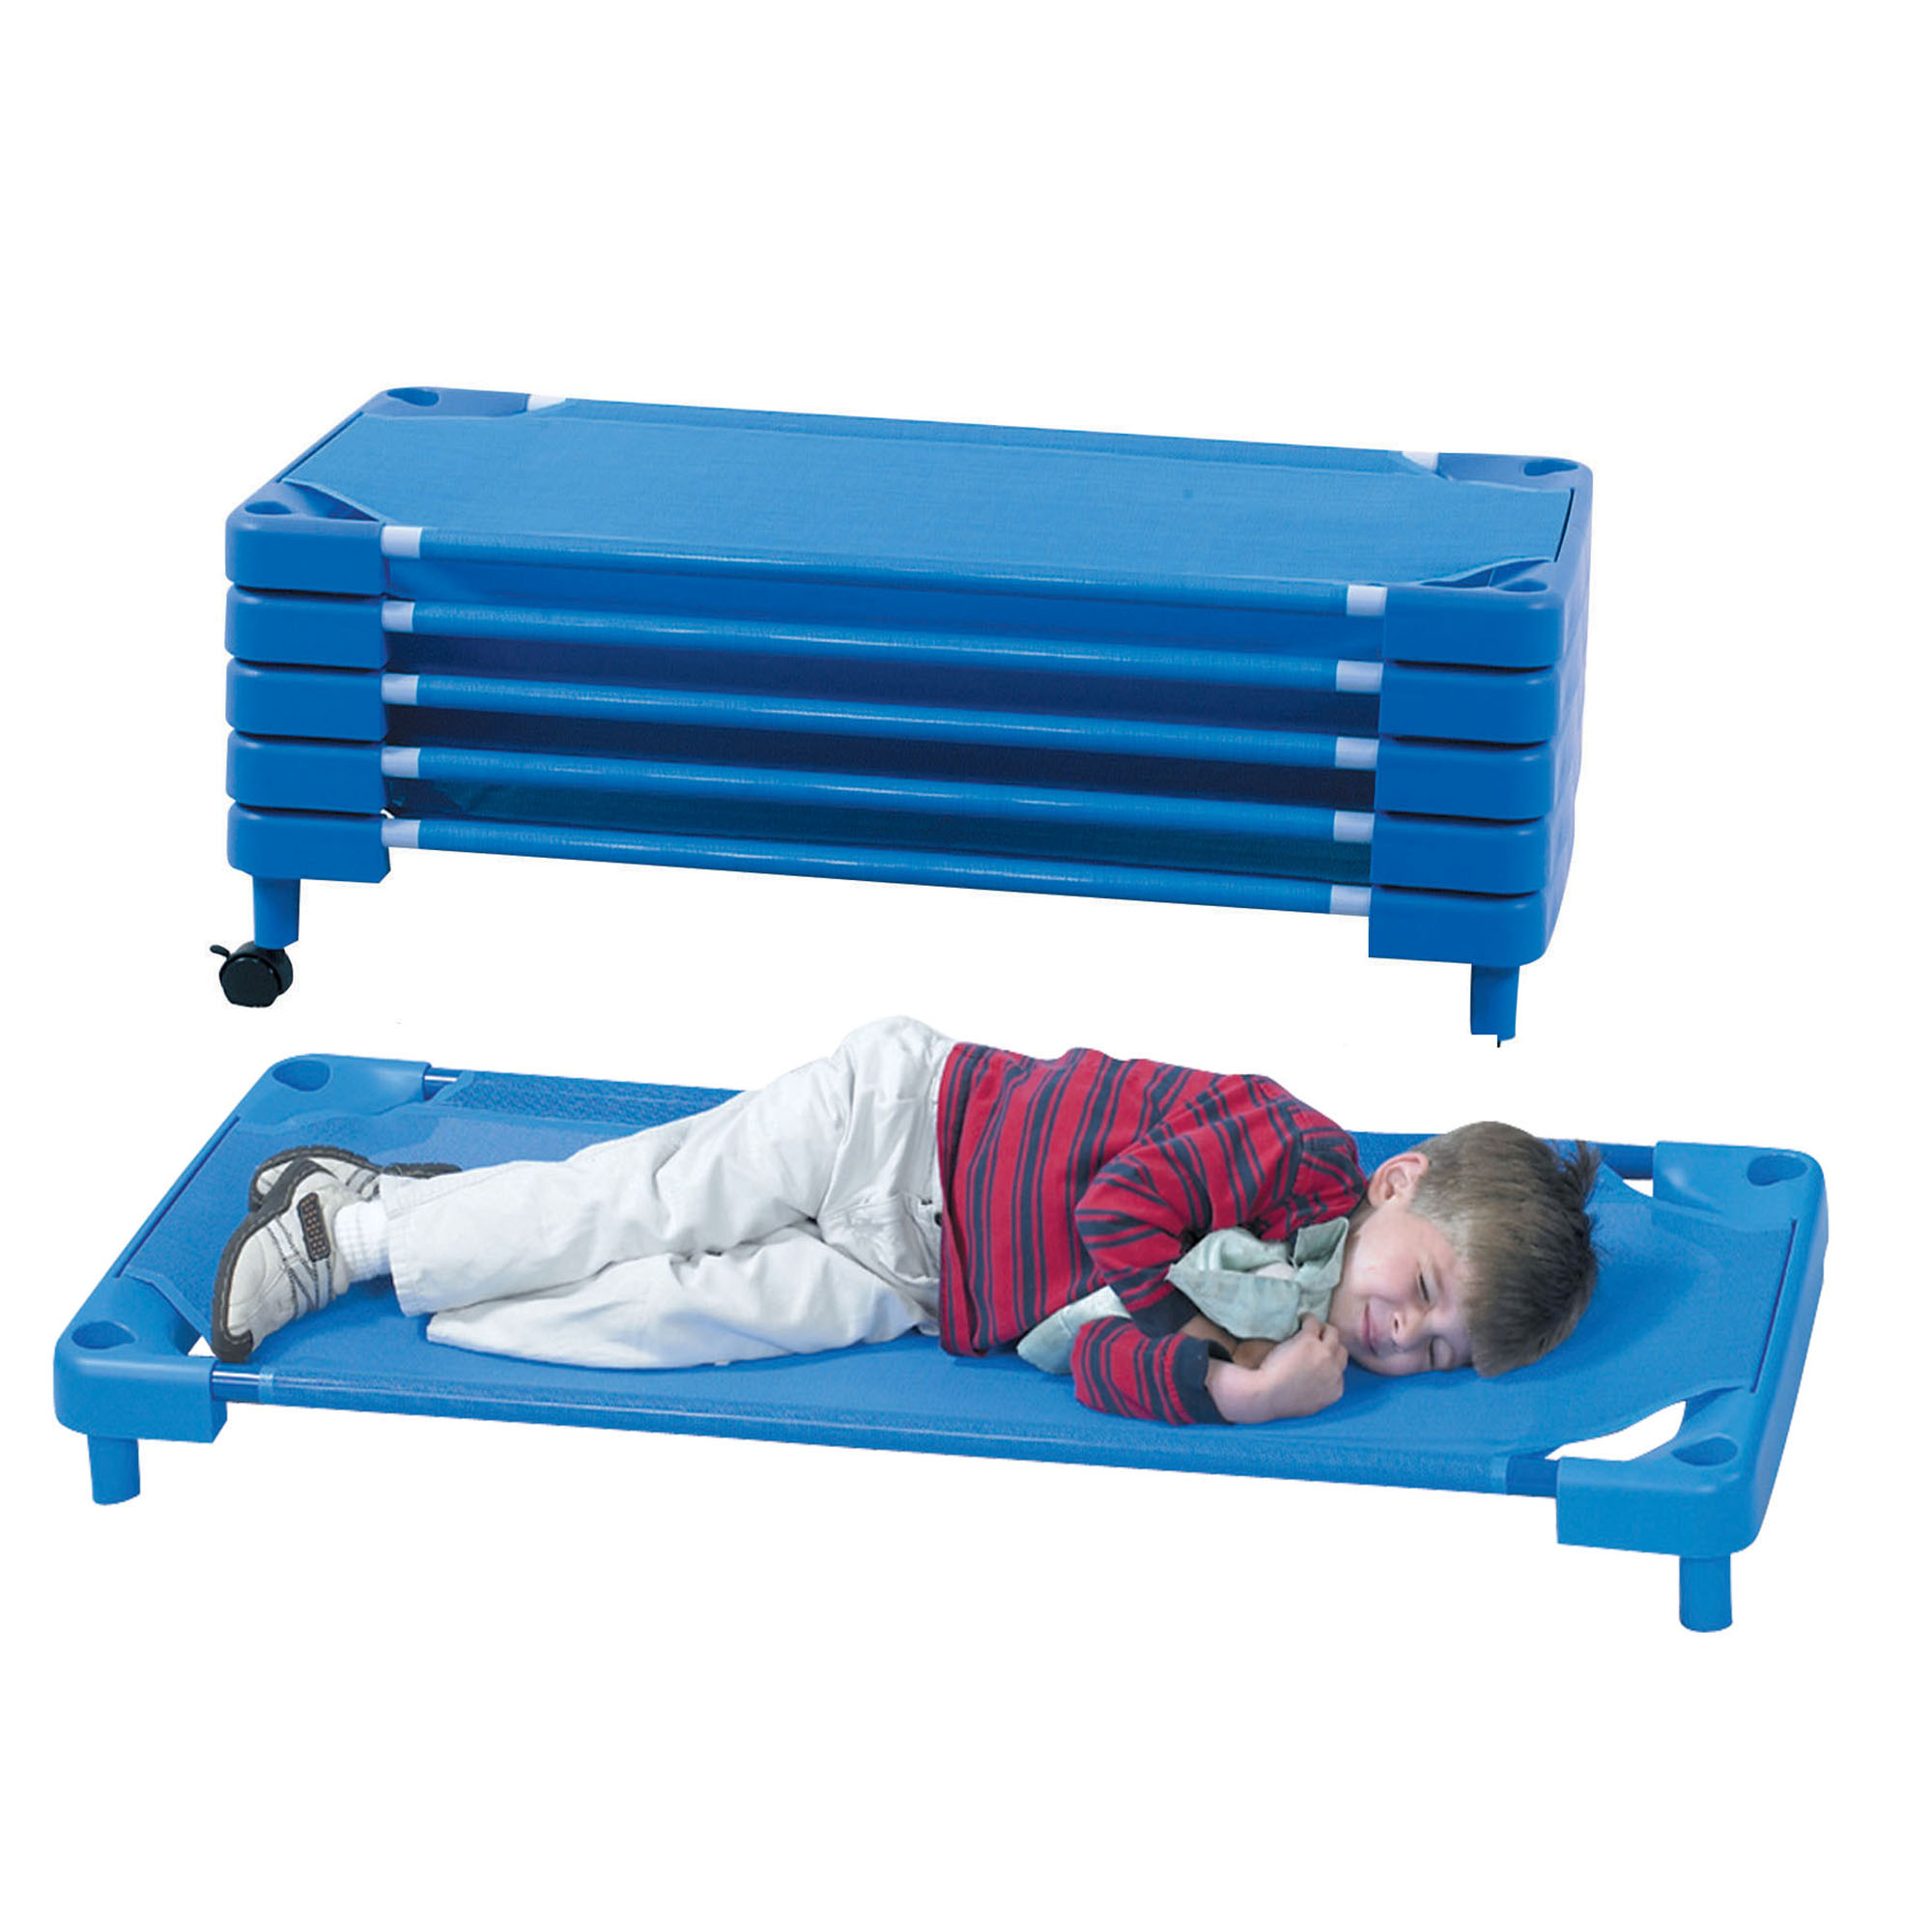 sleeping on a cot